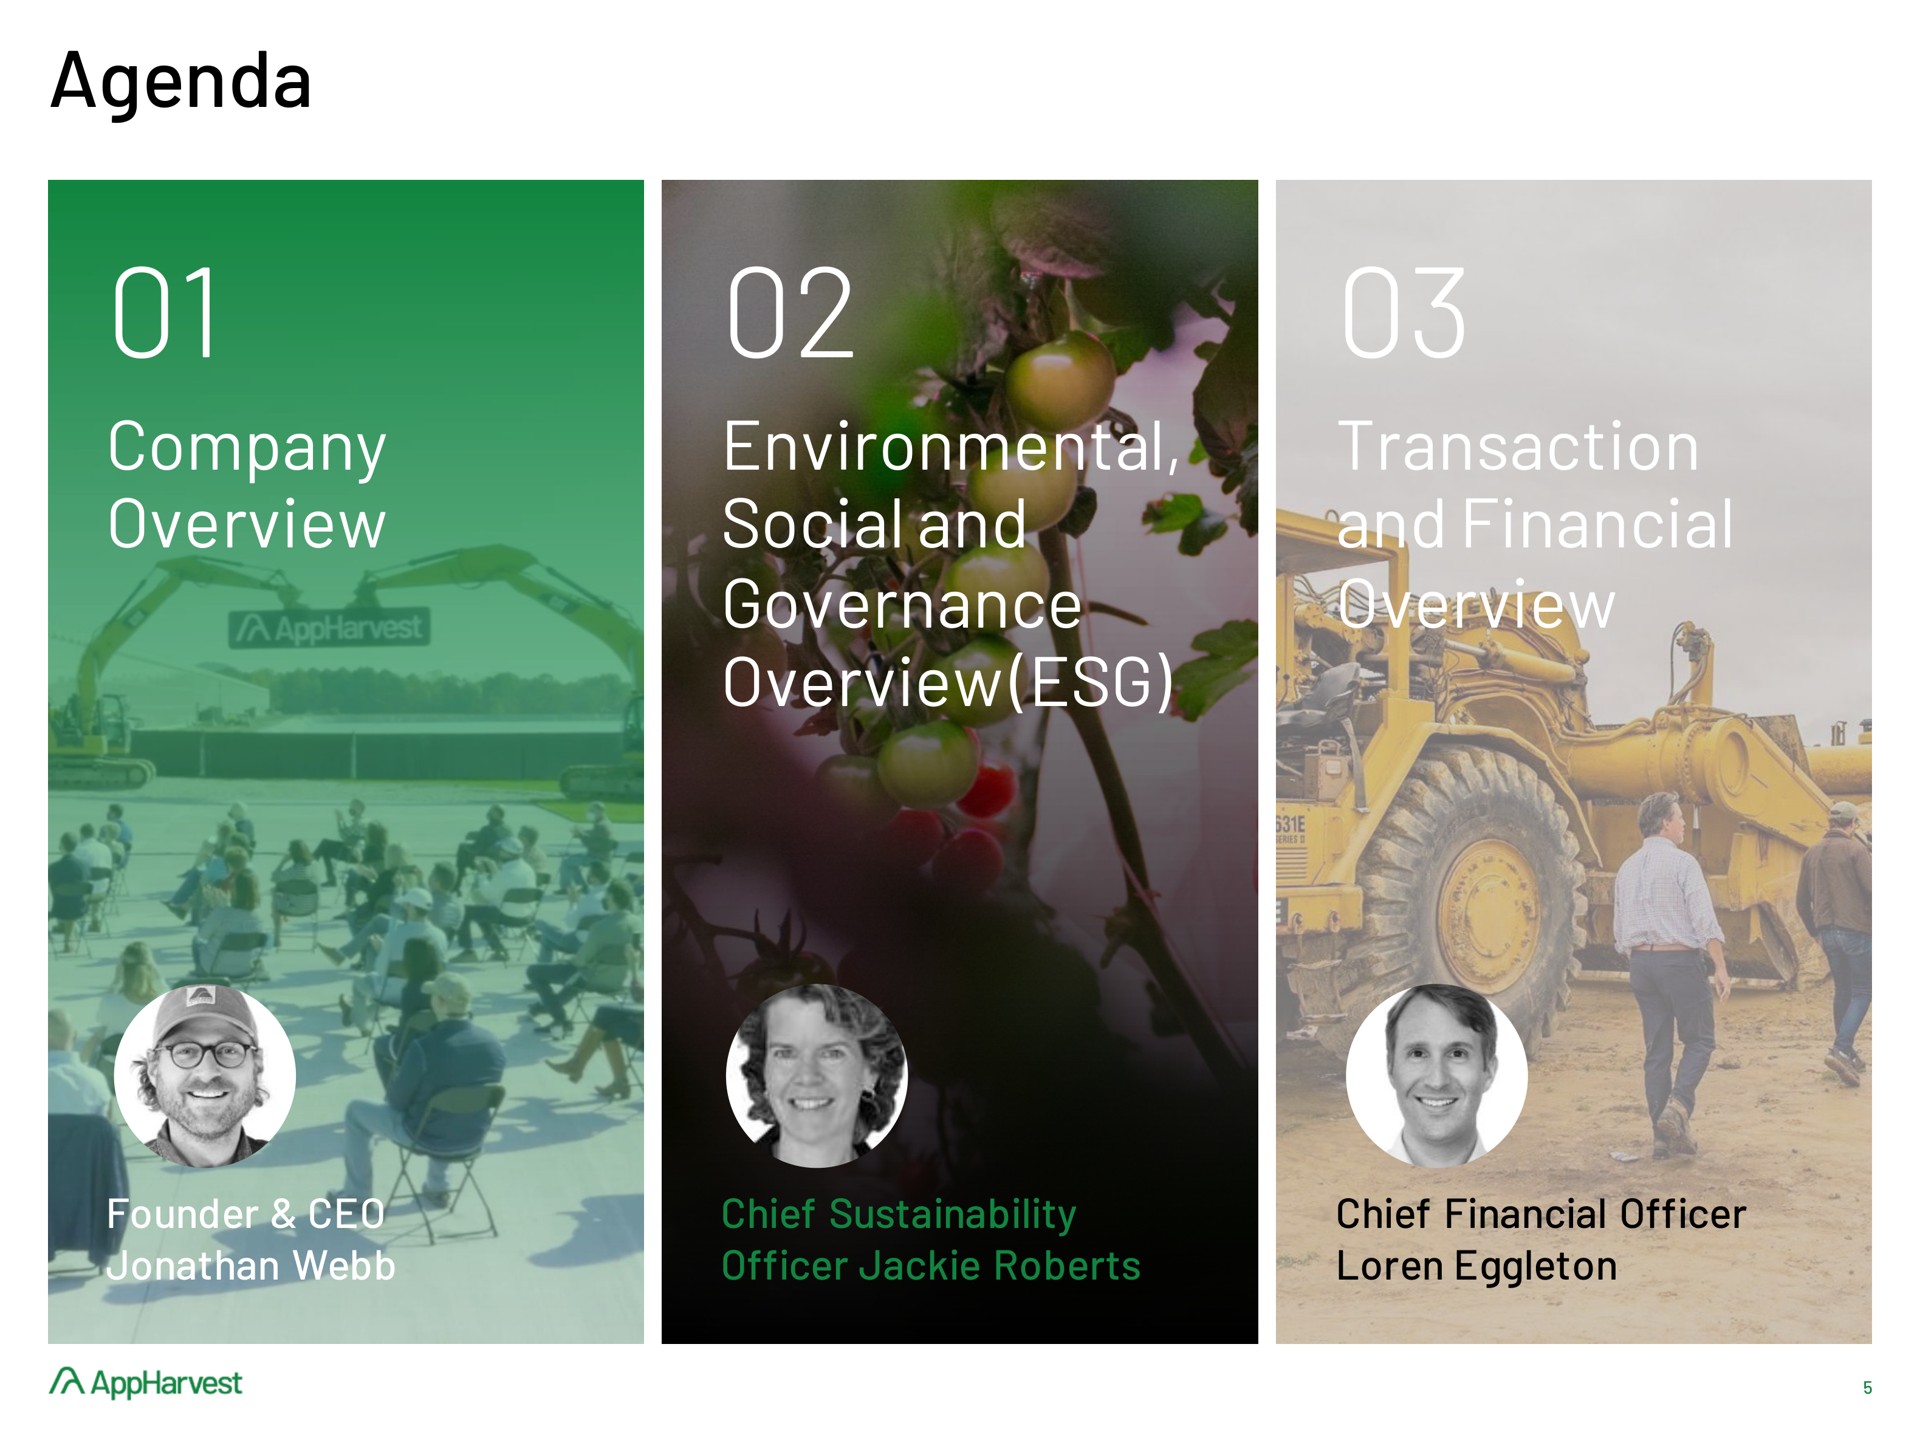 agenda company overview environmental social and governance overview transaction and financial overview chief officer | AppHarvest